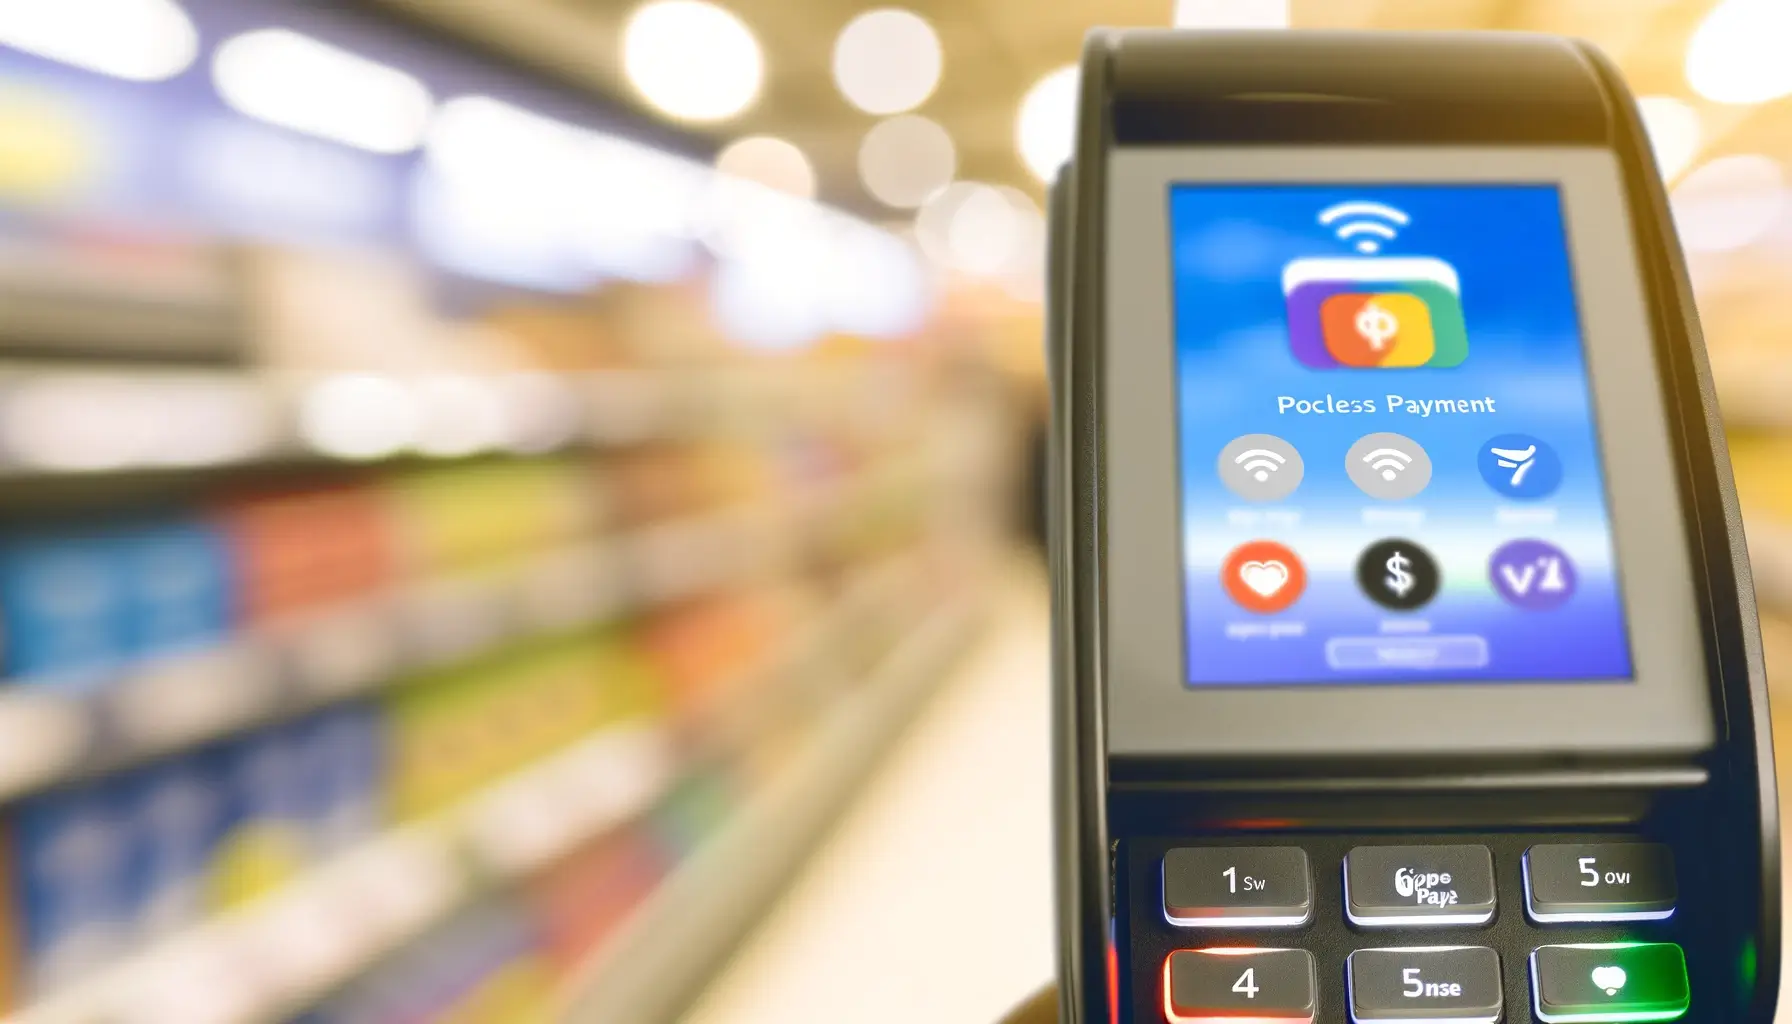 contactless payment machine displaying a successful transaction, with a blurred background of a retail store